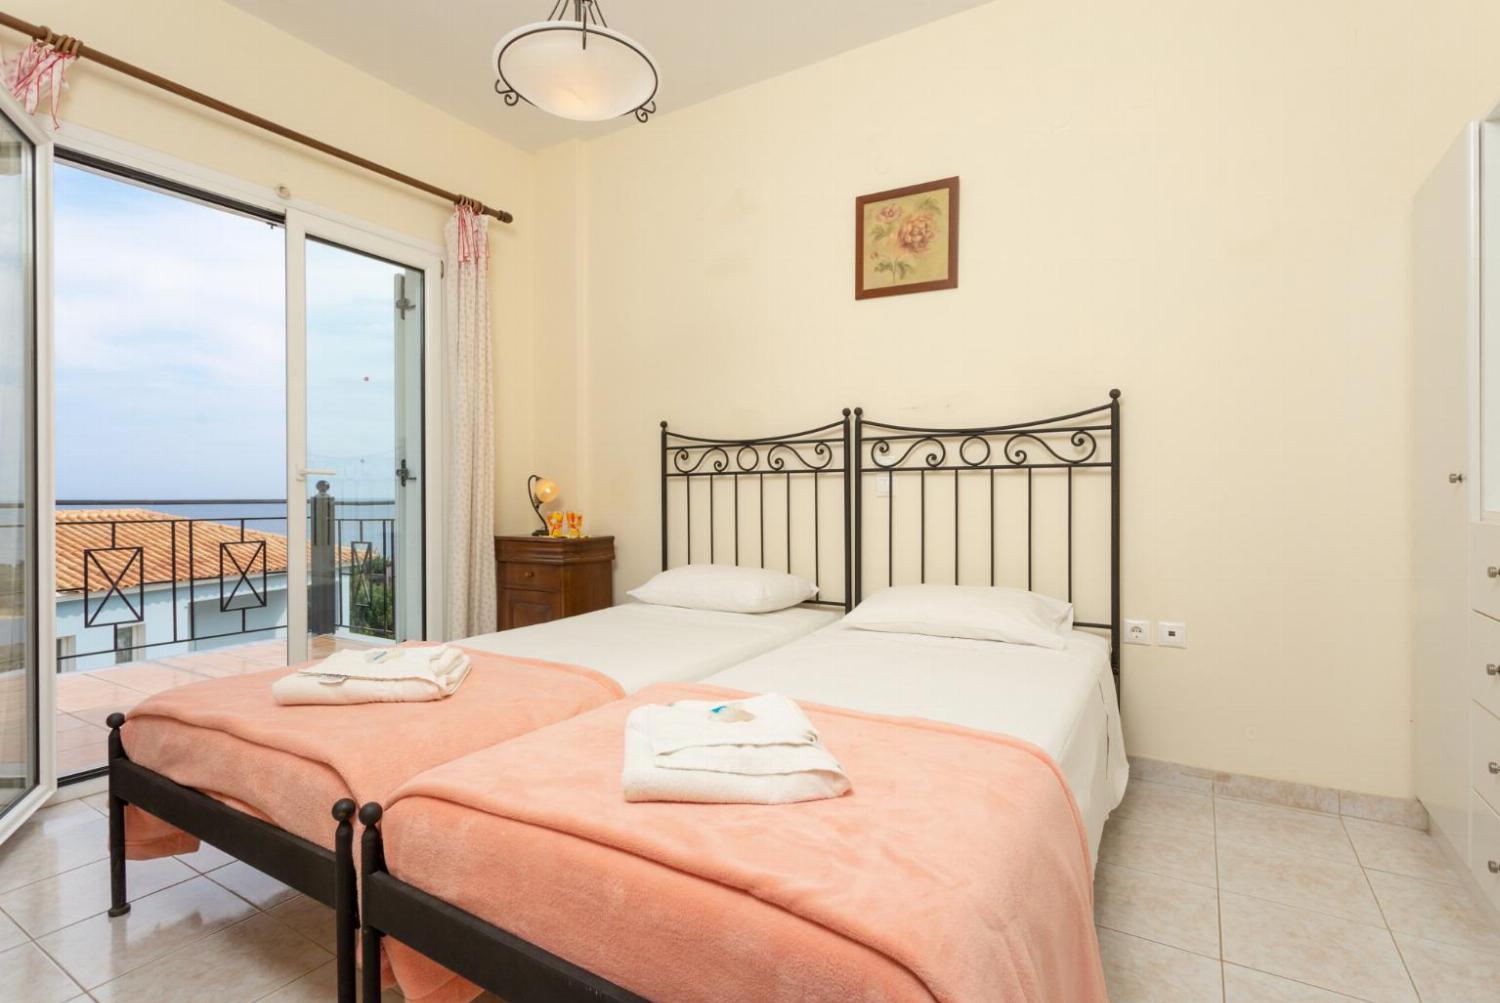 Twin bedroom on the first floor with A/C, and balcony access with sea views